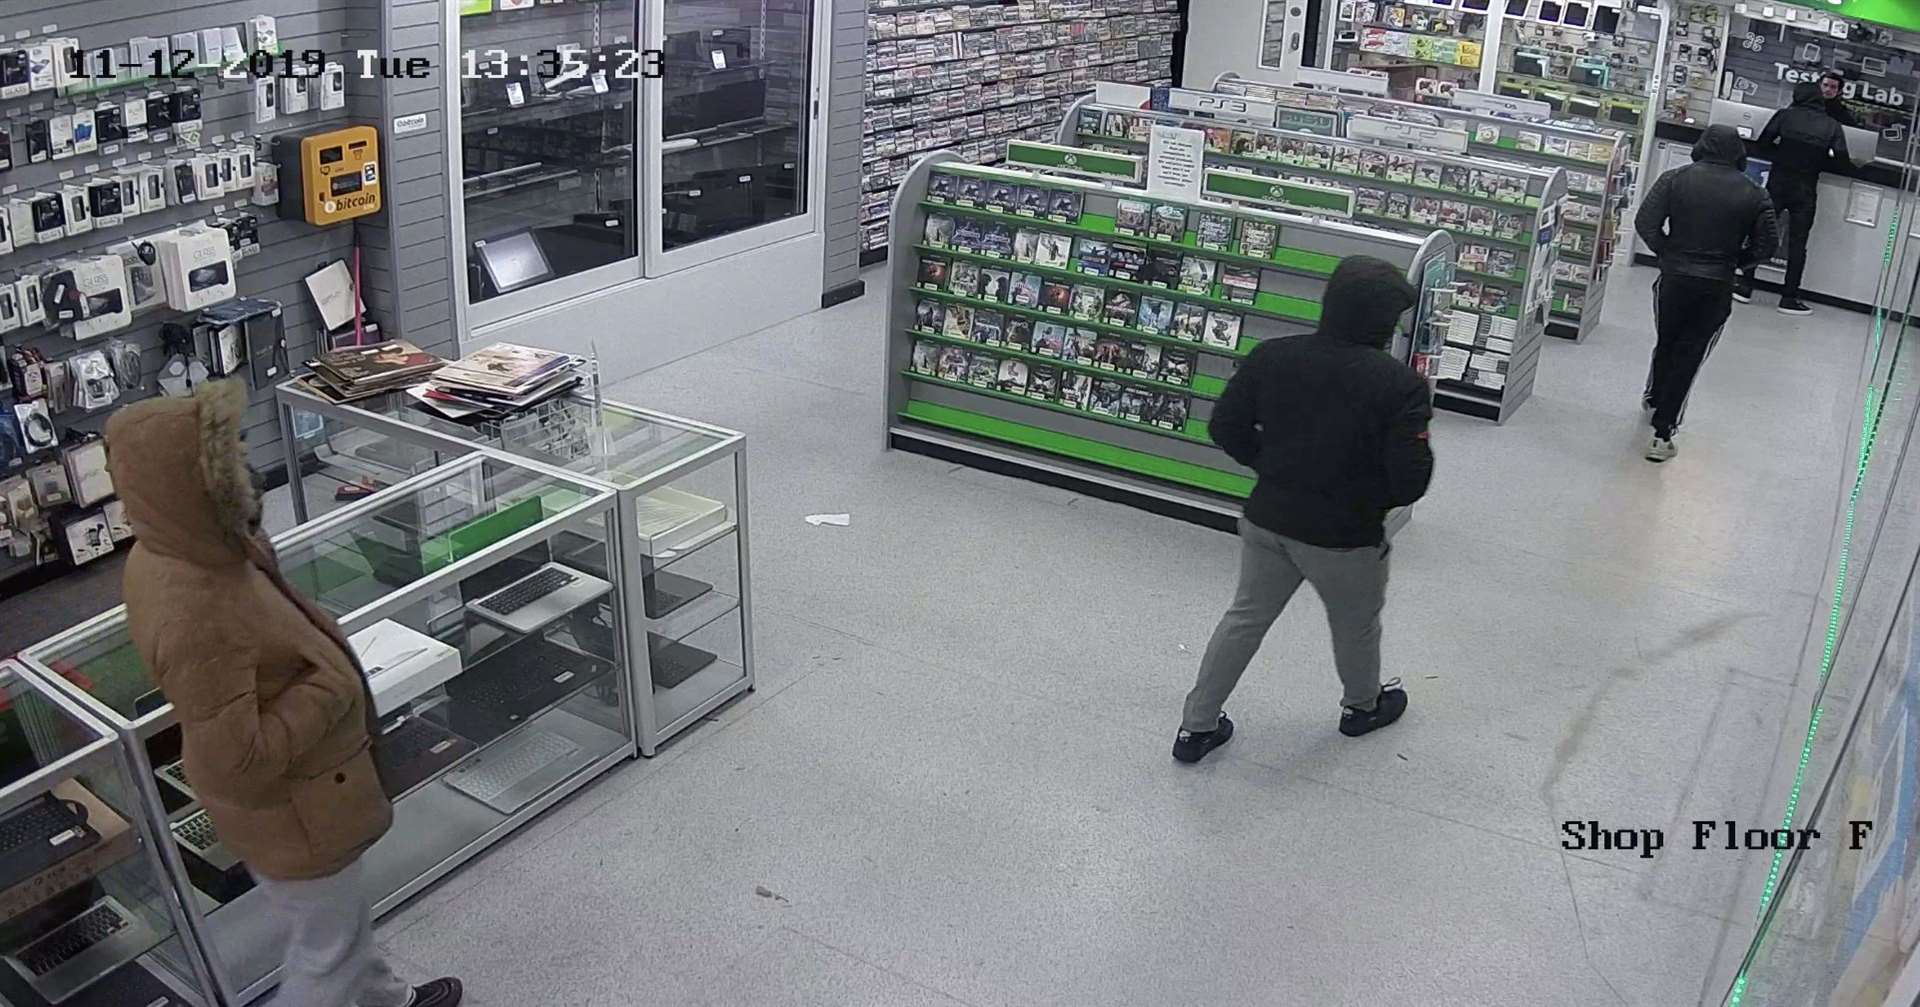 One man jumped over the counter and pushed a member of staff and stole the phones